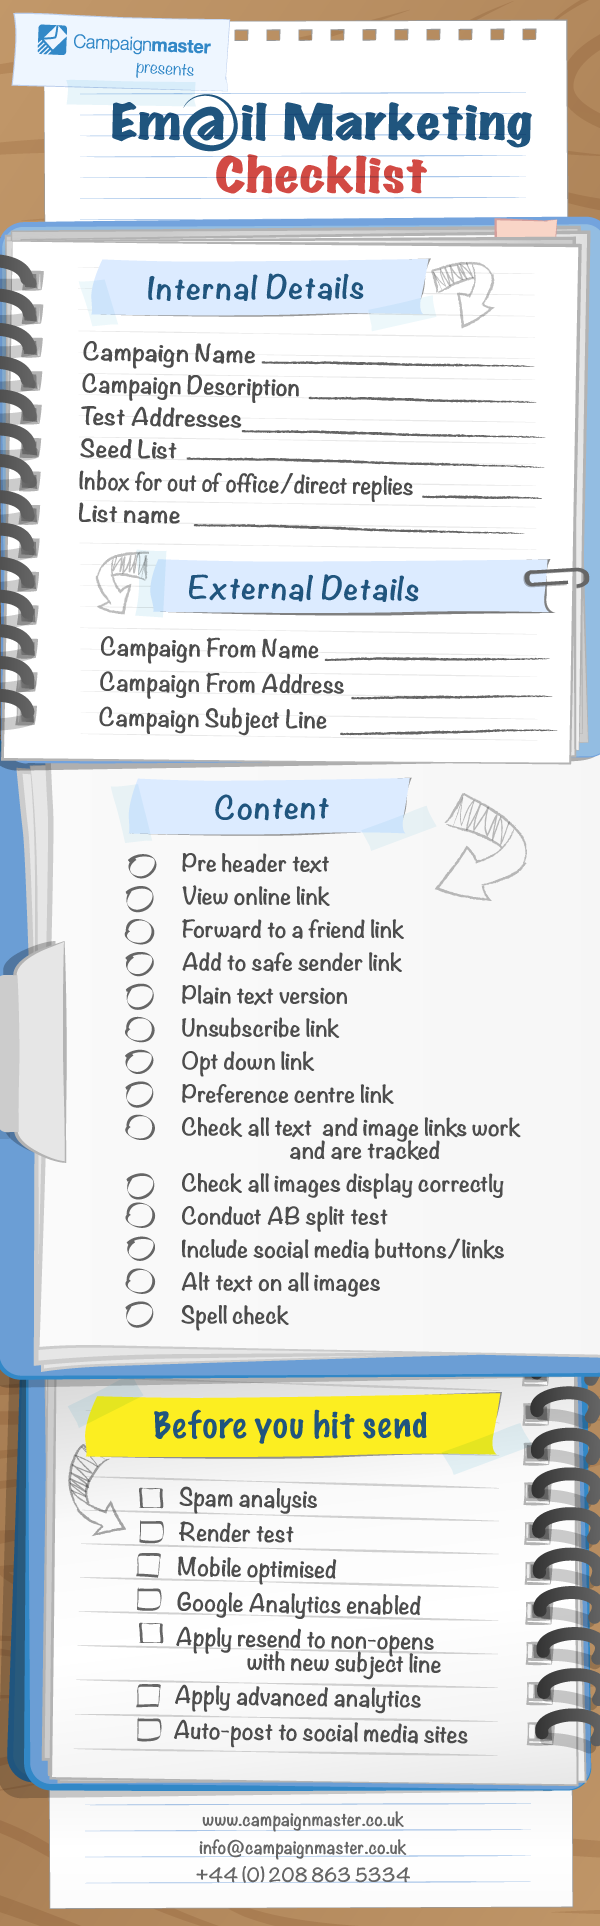 Email Marketing Checklist Campaignmaster Your Easy Solution to